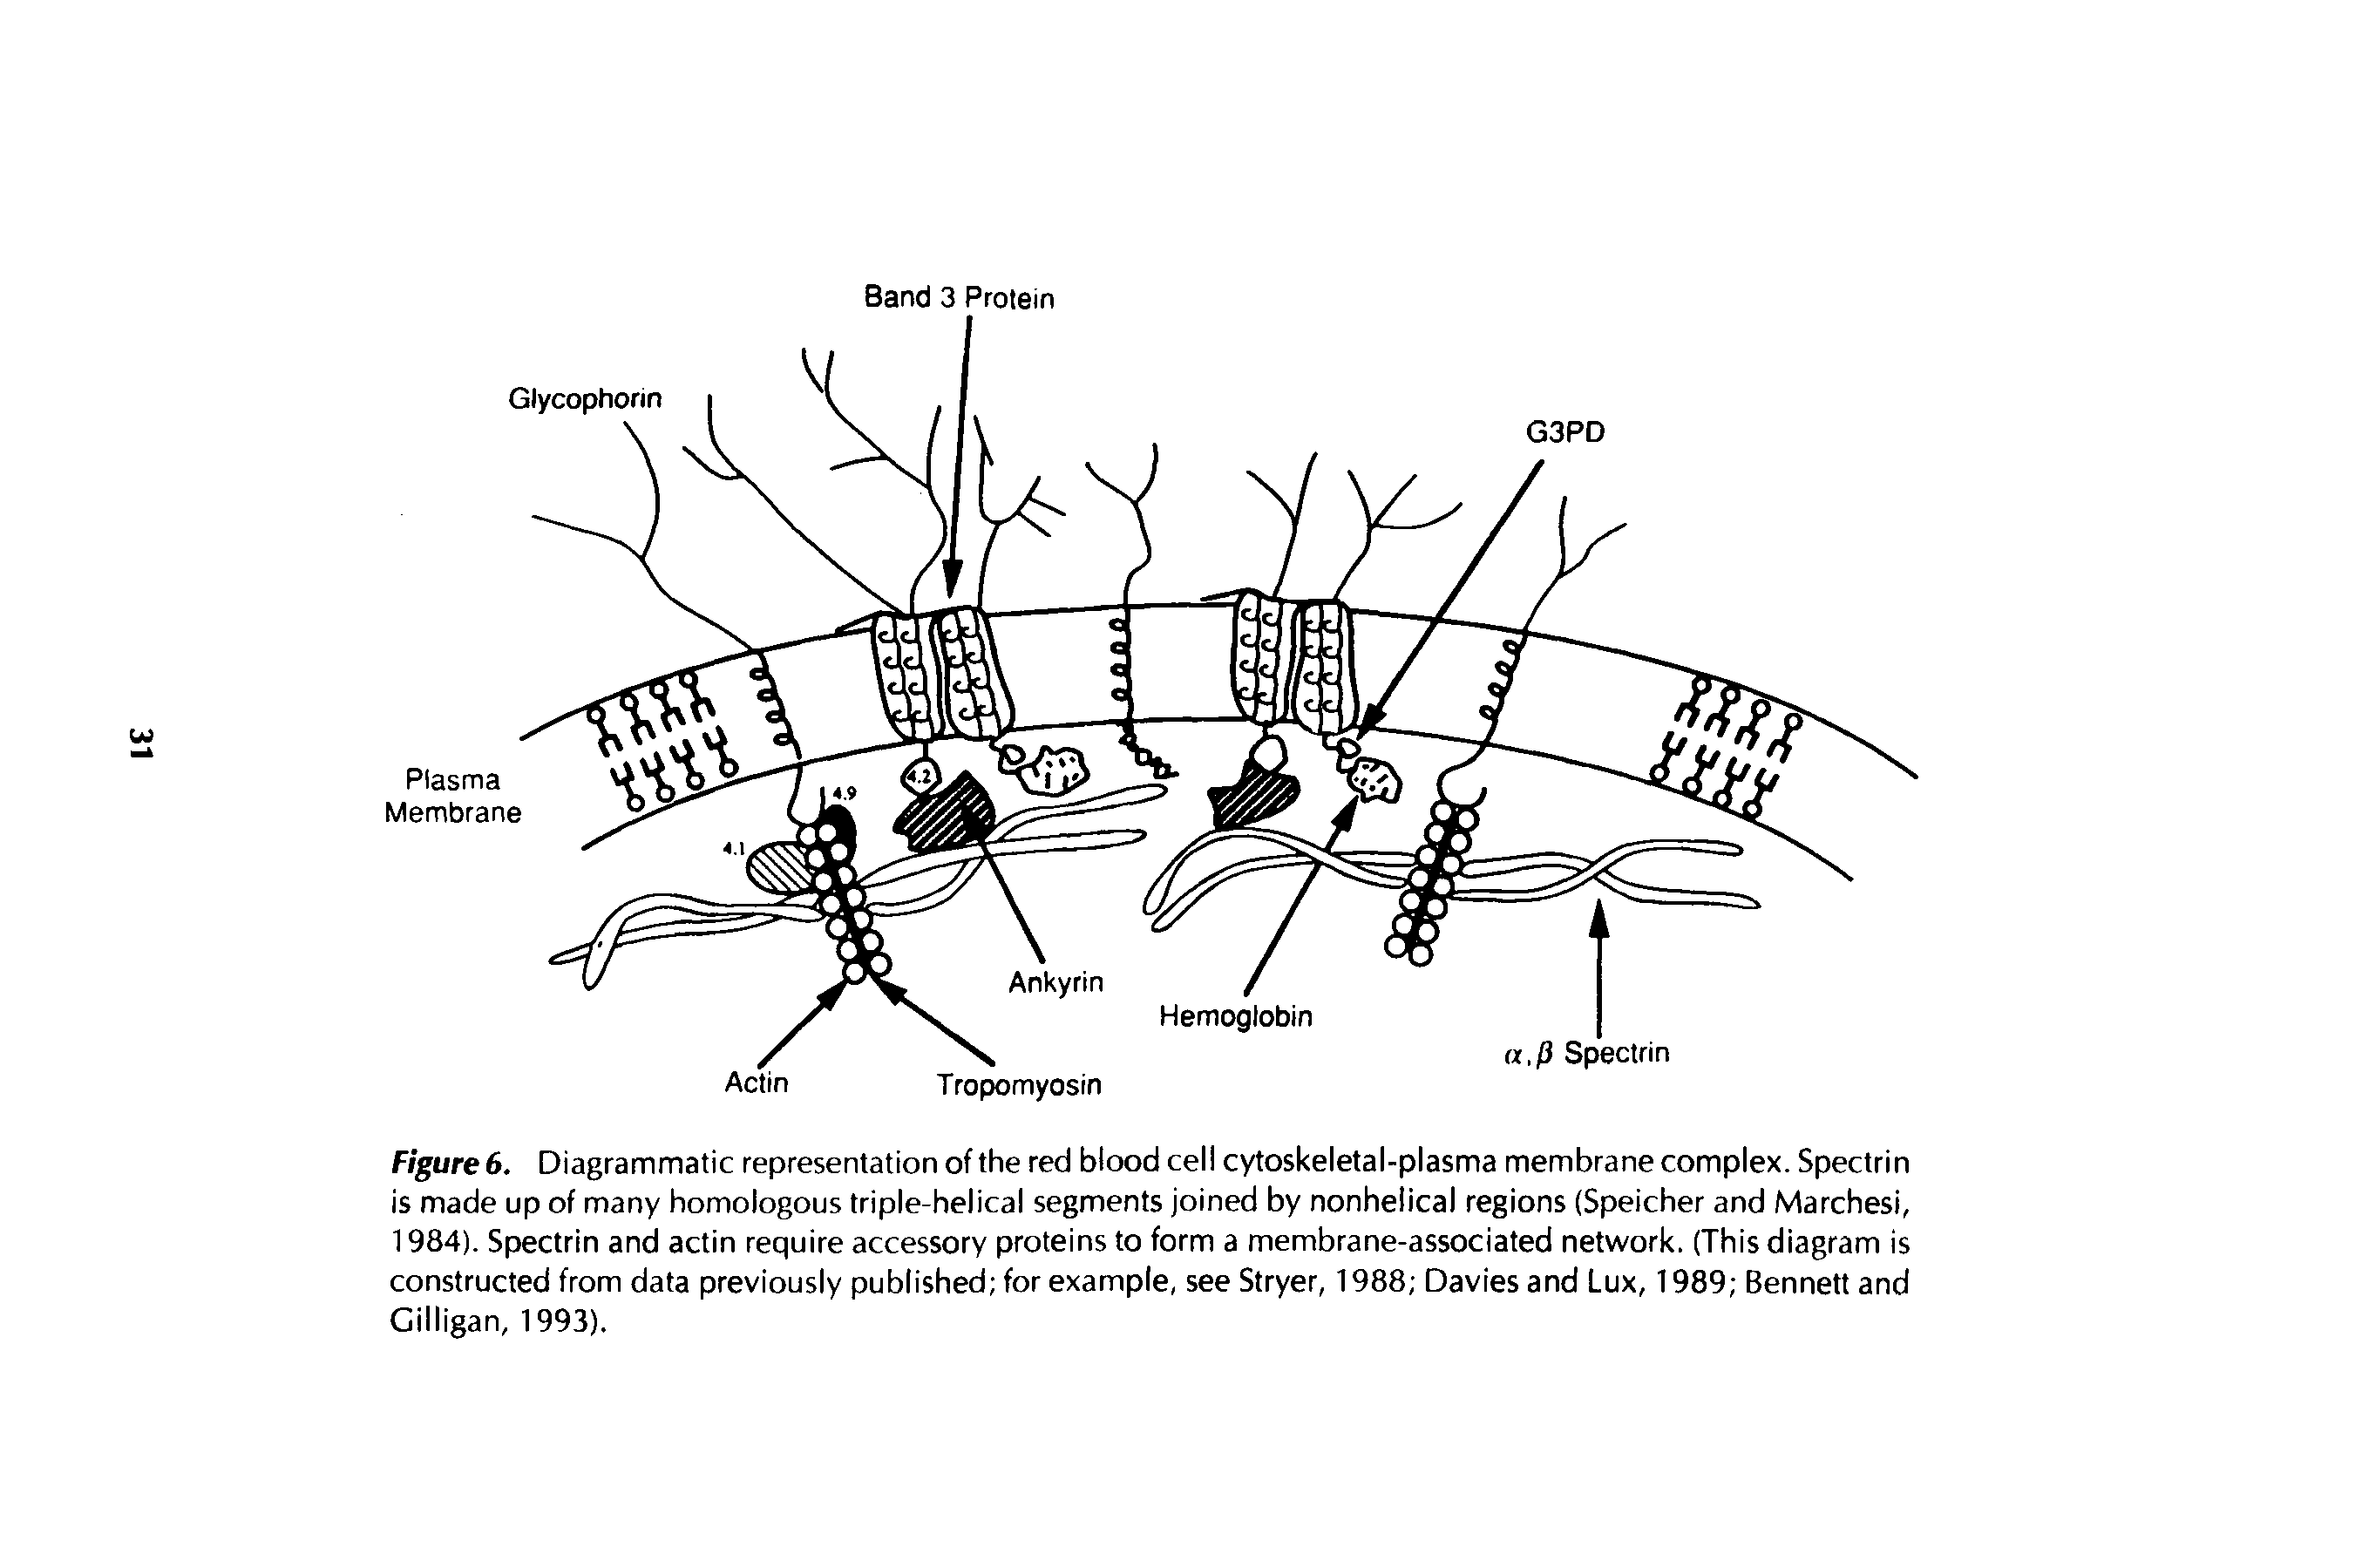 Figured. Diagrammatic representation of the red blood cell cytoskeletal-plasma membrane complex. Spectrin is made up of many homologous triple-helical segments joined by nonhelical regions (Speicher and Marchesi, 1984). Spectrin and actin require accessory proteins to form a membrane-associated network. (This diagram is constructed from data previously published for example, see Stryer, 1988 Davies and Lux, 1989 Bennett and Gilligan, 1993).